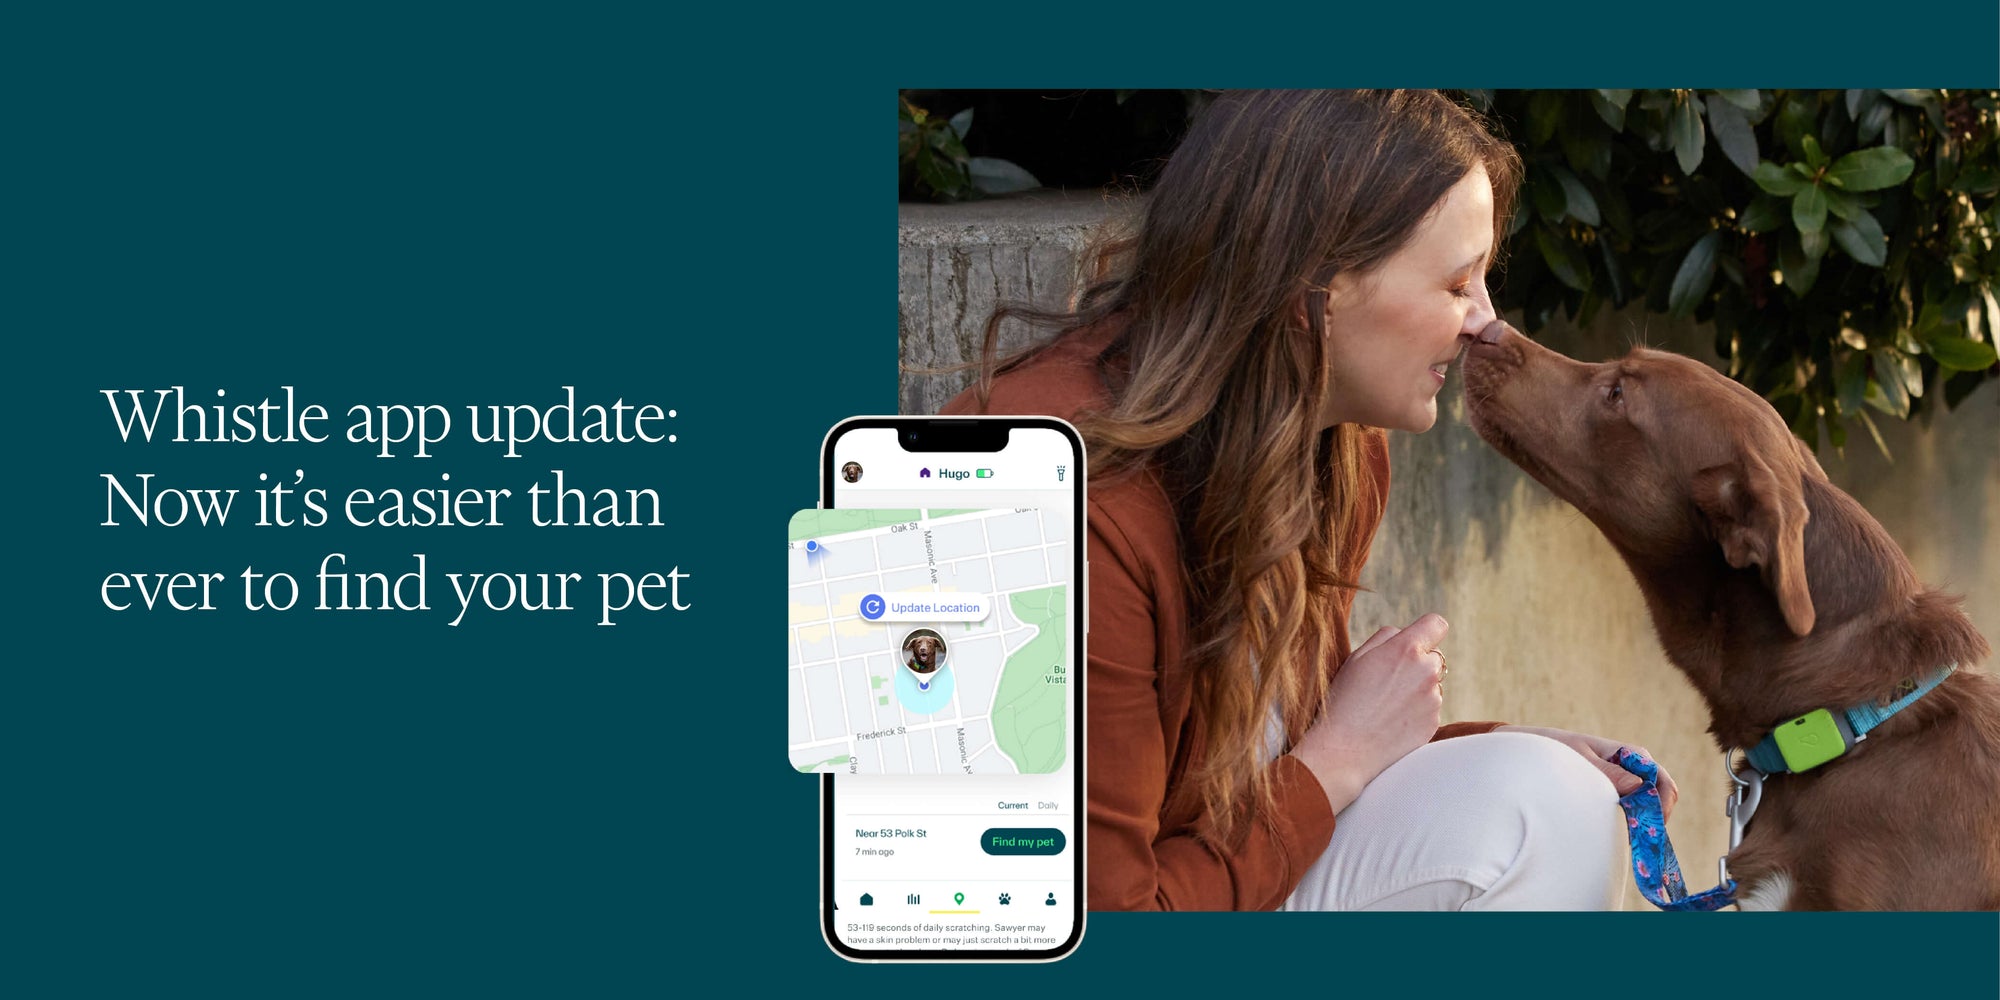 Whistle App Update: Now it's easier than ever to find your pet - Whistle